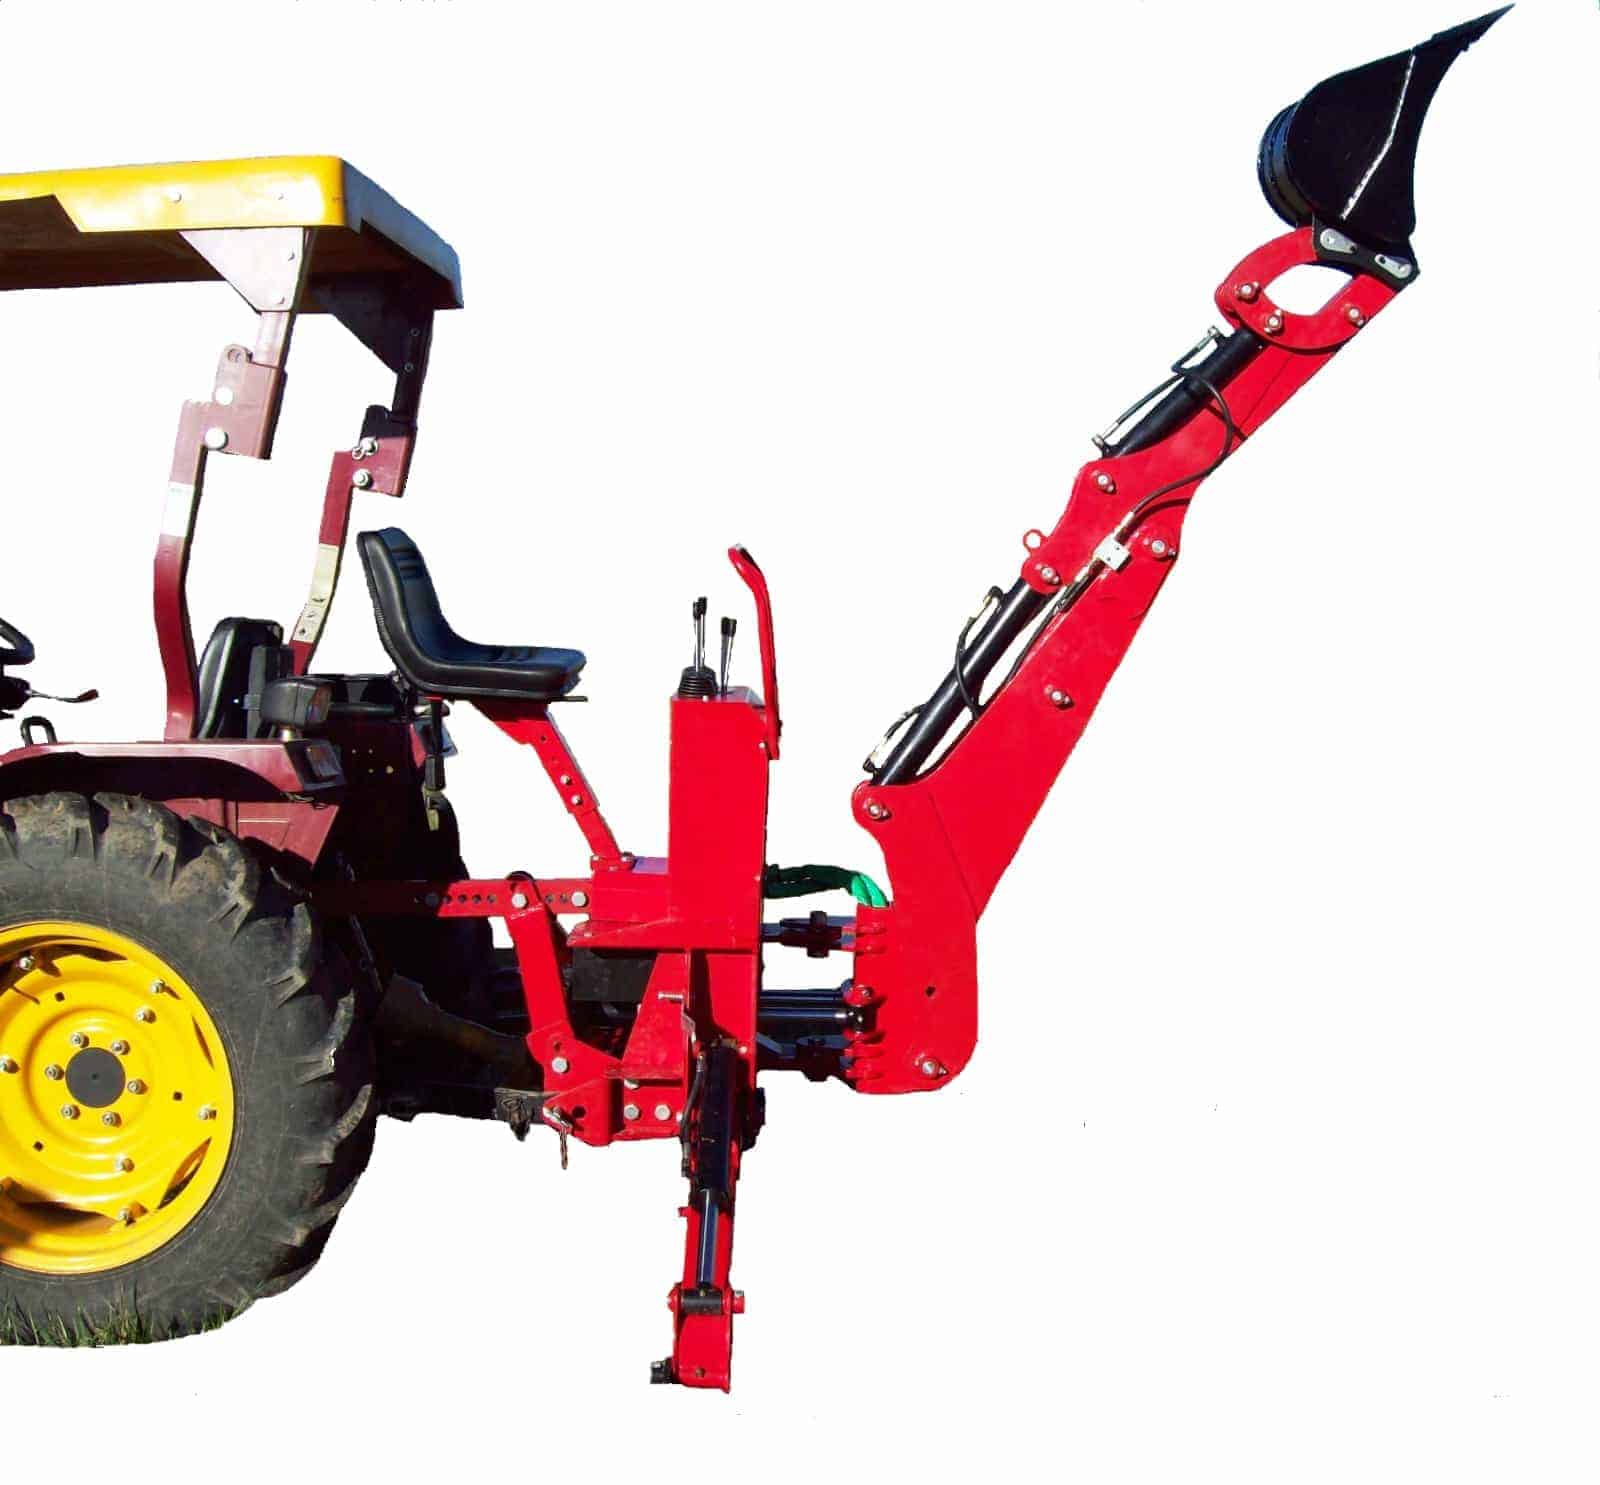 Image of Towable tiller with rotating blades mounted on frame towed behind backhoe